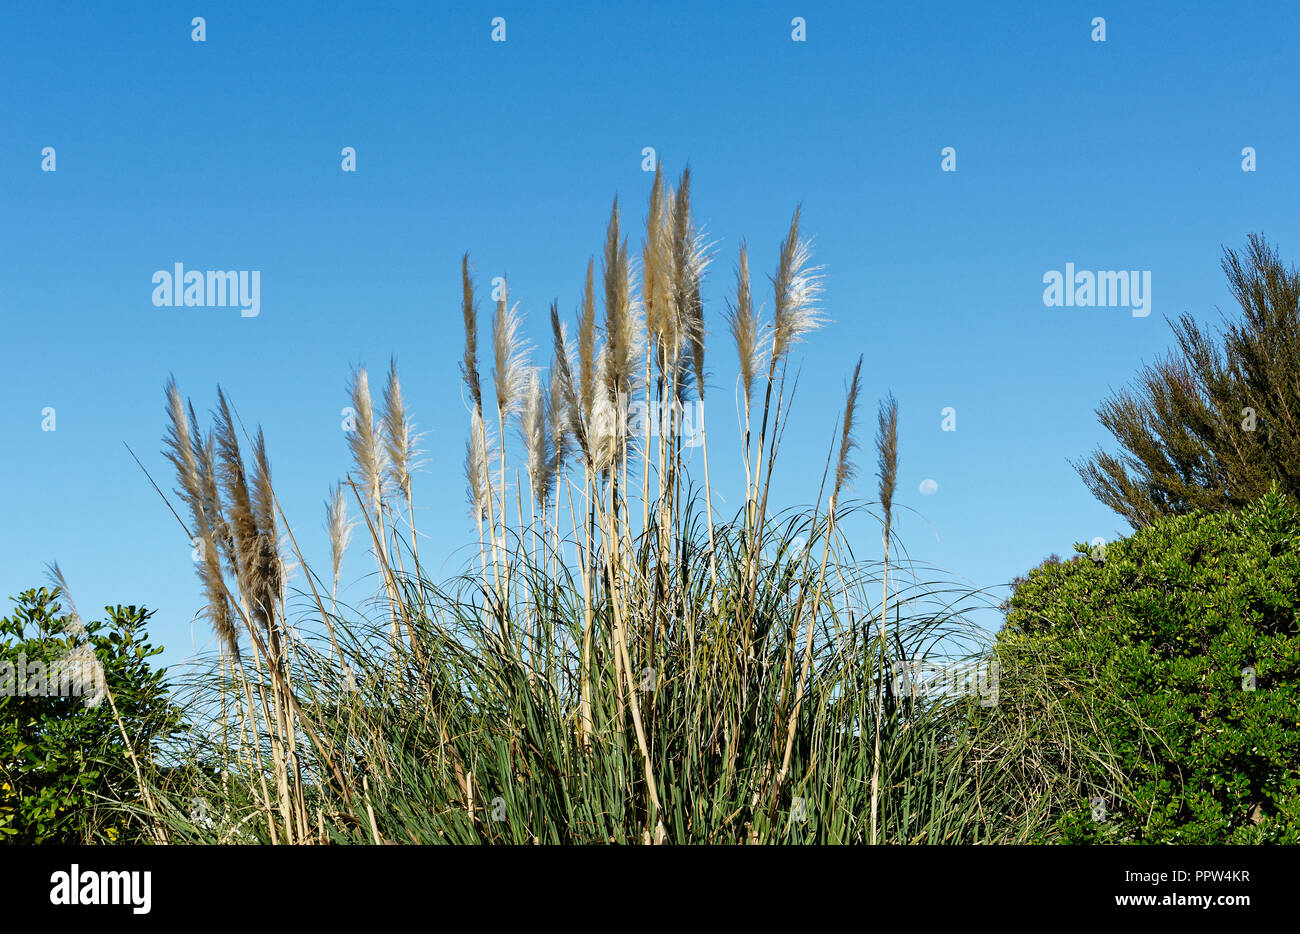 Cortaderia splendens, Toe toe which used to be spelled Toi toi, in flower against a blue sky Stock Photo